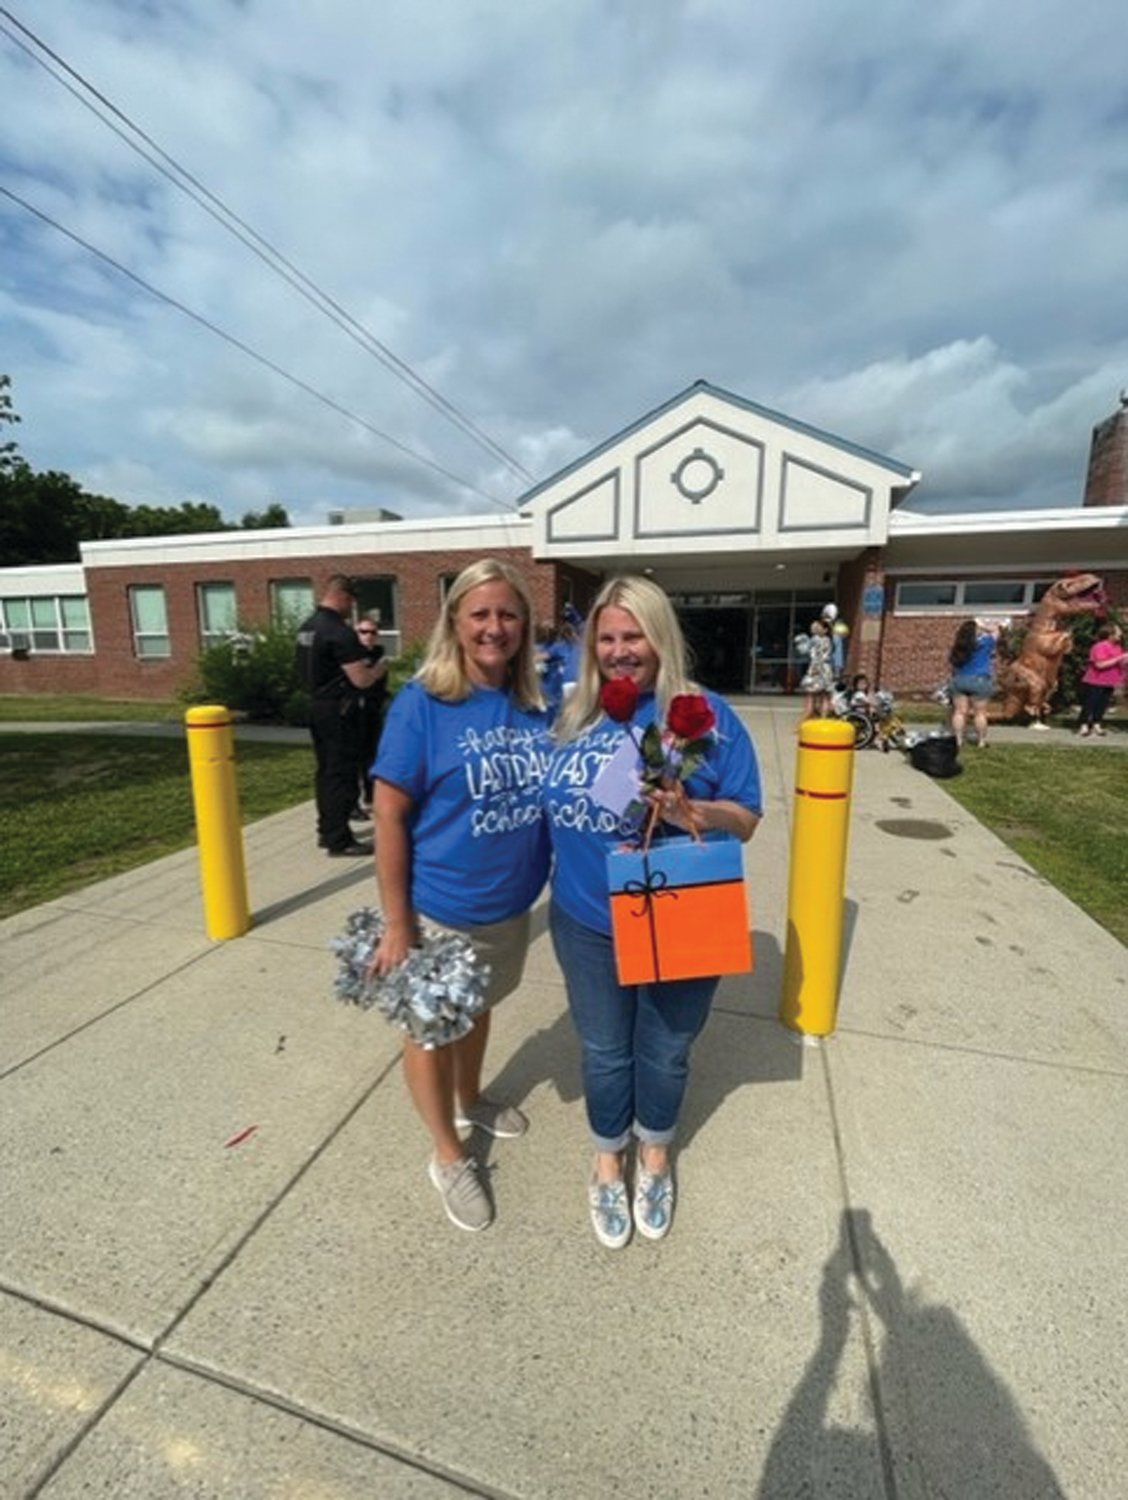 DYNAMIC DUO: Winsor Hill School Principal Dr. Amy Burns (right) and Health/Physical Education Teacher Susan Parillo during last week’s special send-off for some nearly 400 students.